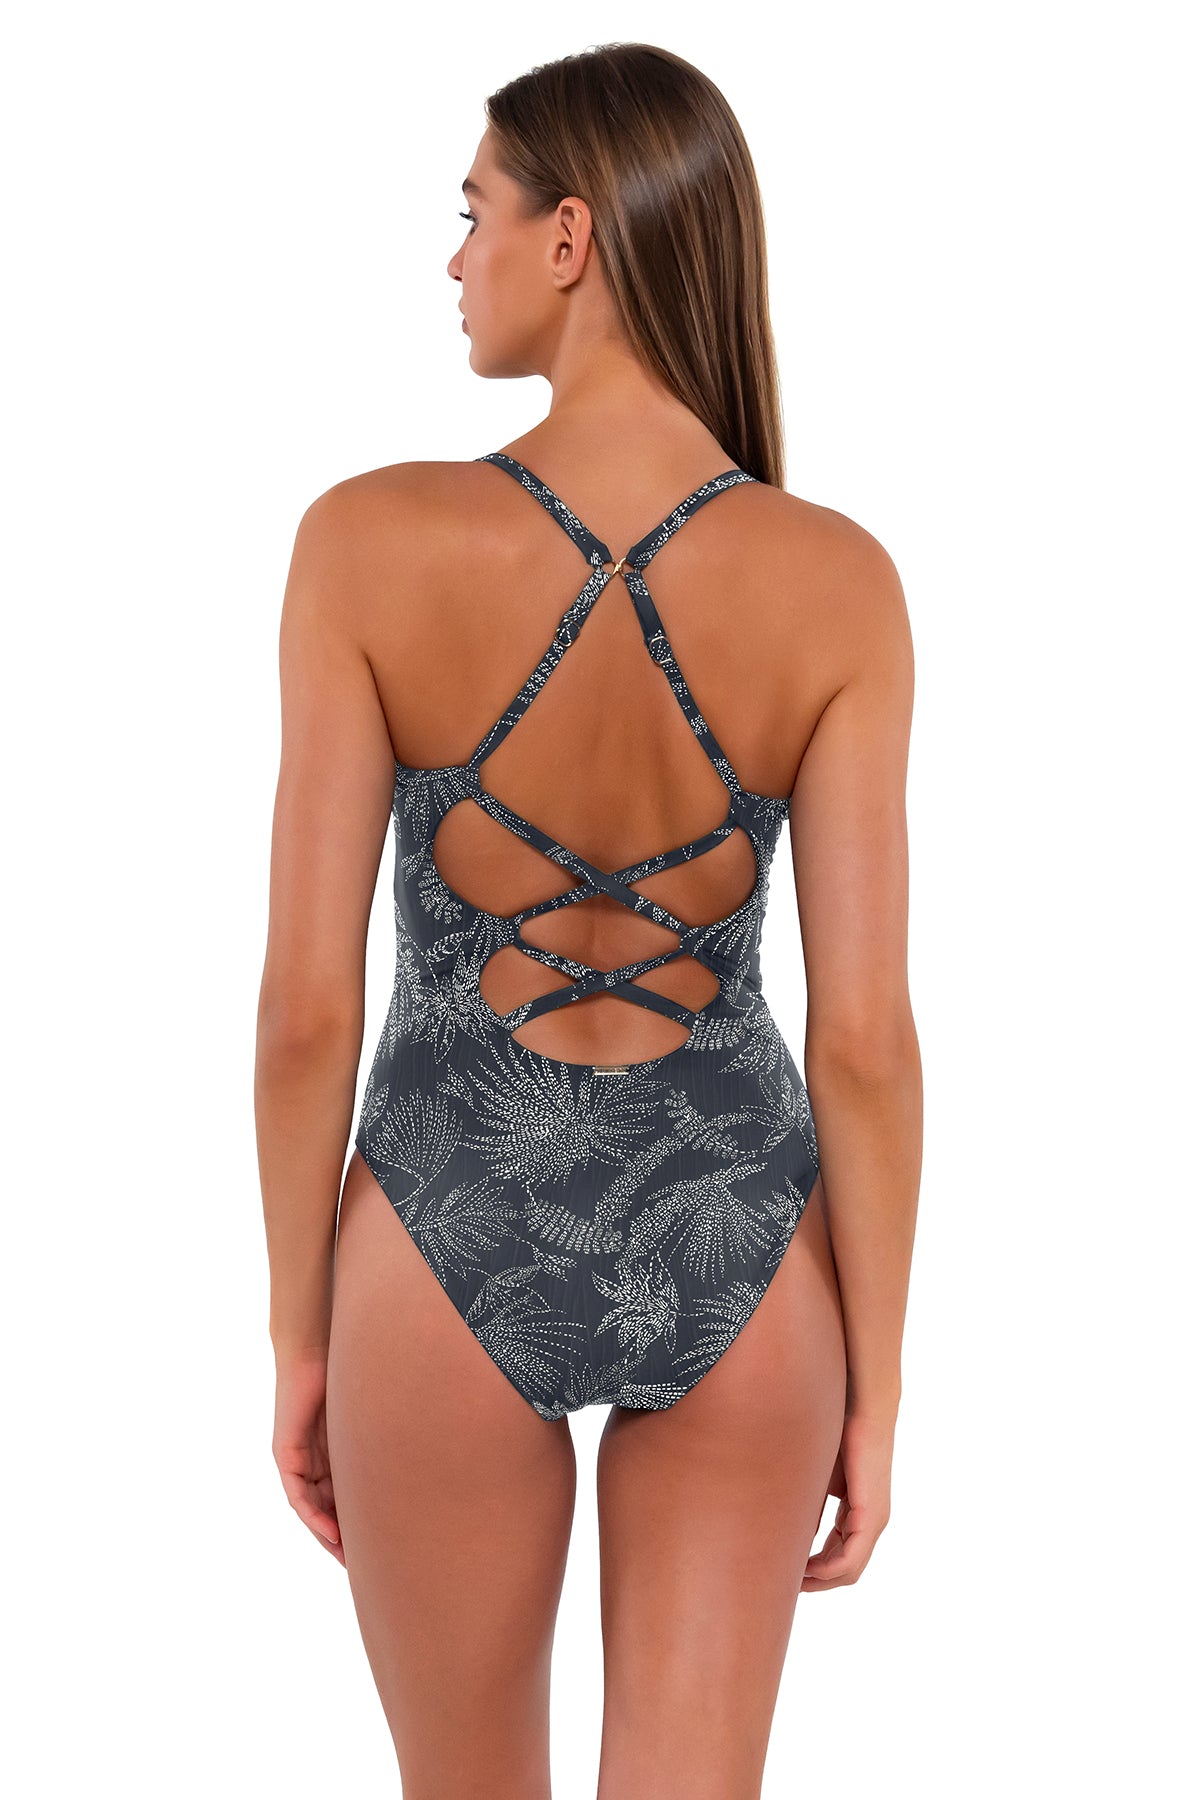 Back pose #1 of Daria wearing Sunsets Fanfare Seagrass Texture Veronica One Piece showing crossback straps